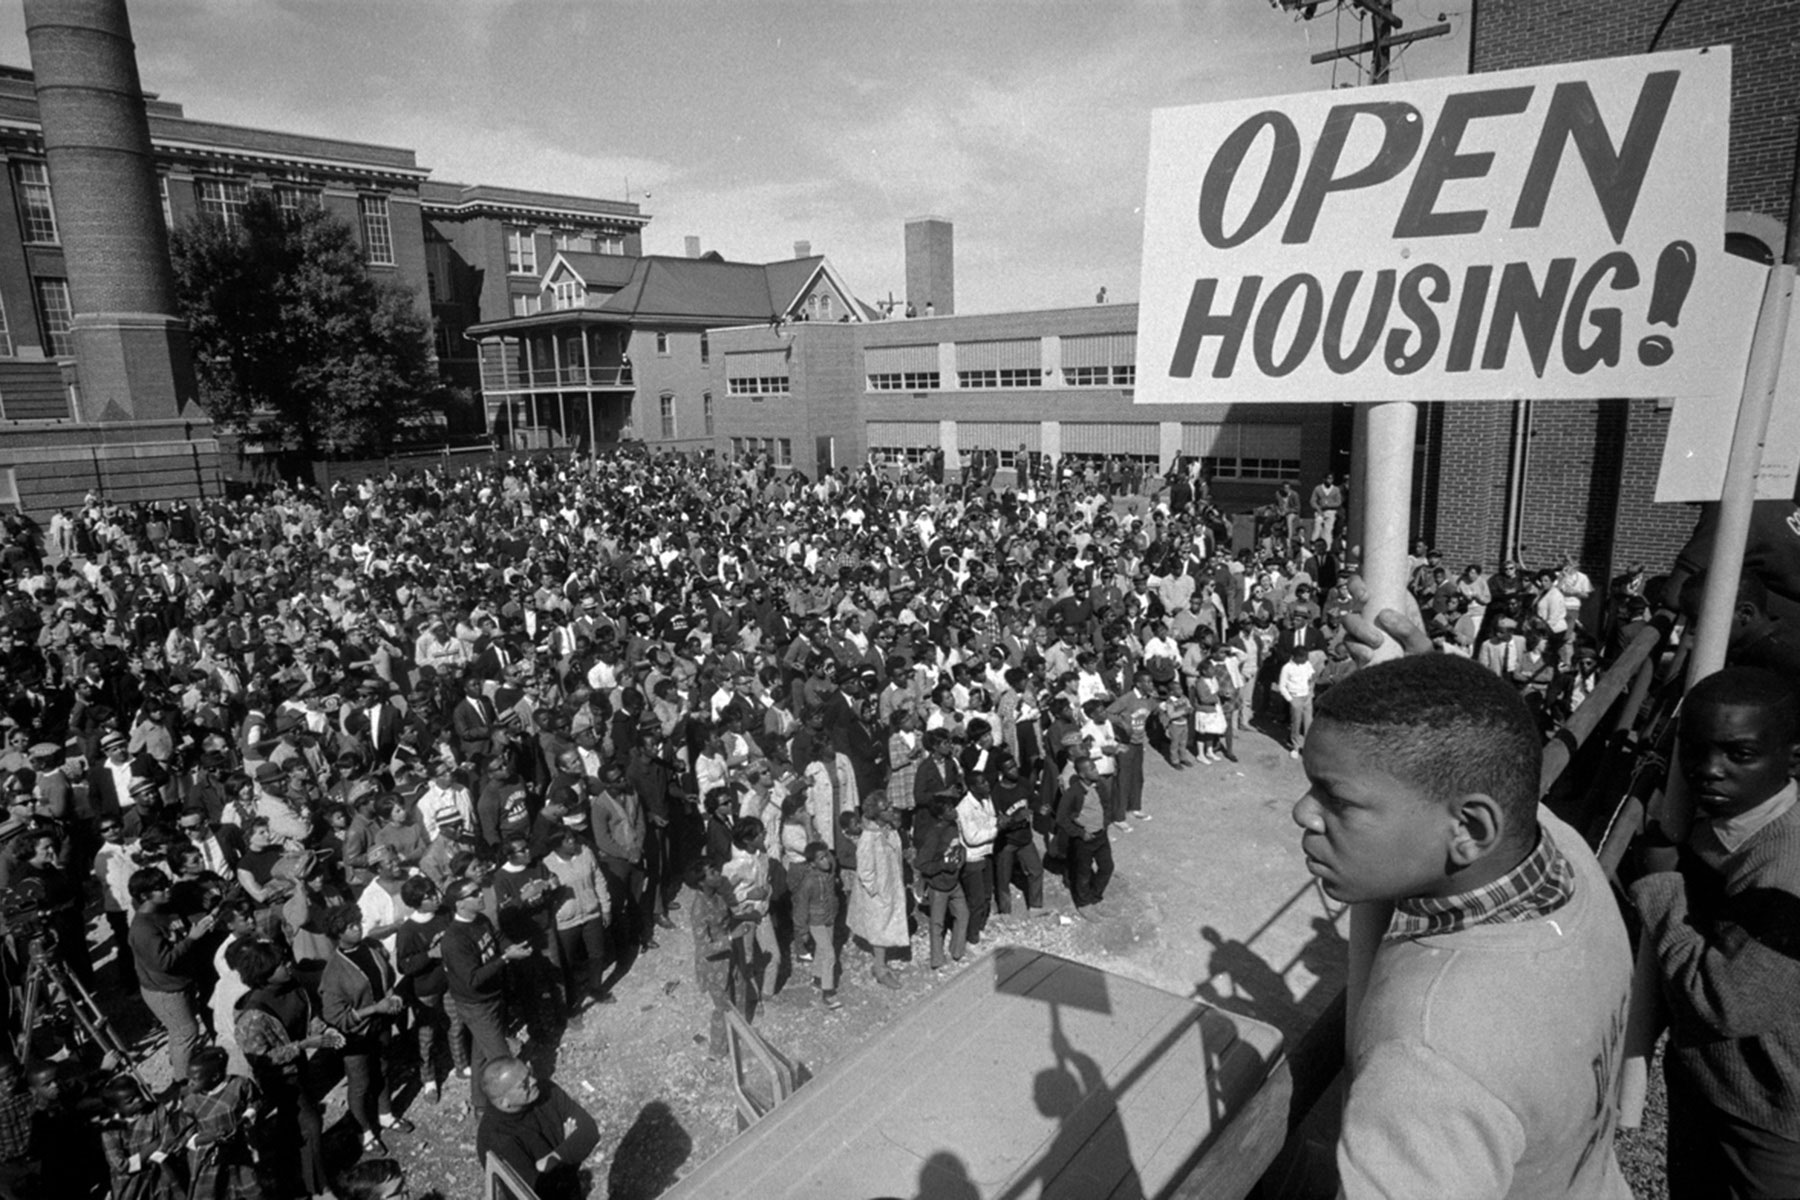 The Milwaukee Metropolitan Fair Housing Council was born out of the Civil Rights Movement and open housing demonstrations of the 1960s. A large group of such demonstrators are pictured here outside St. Boniface Church.  